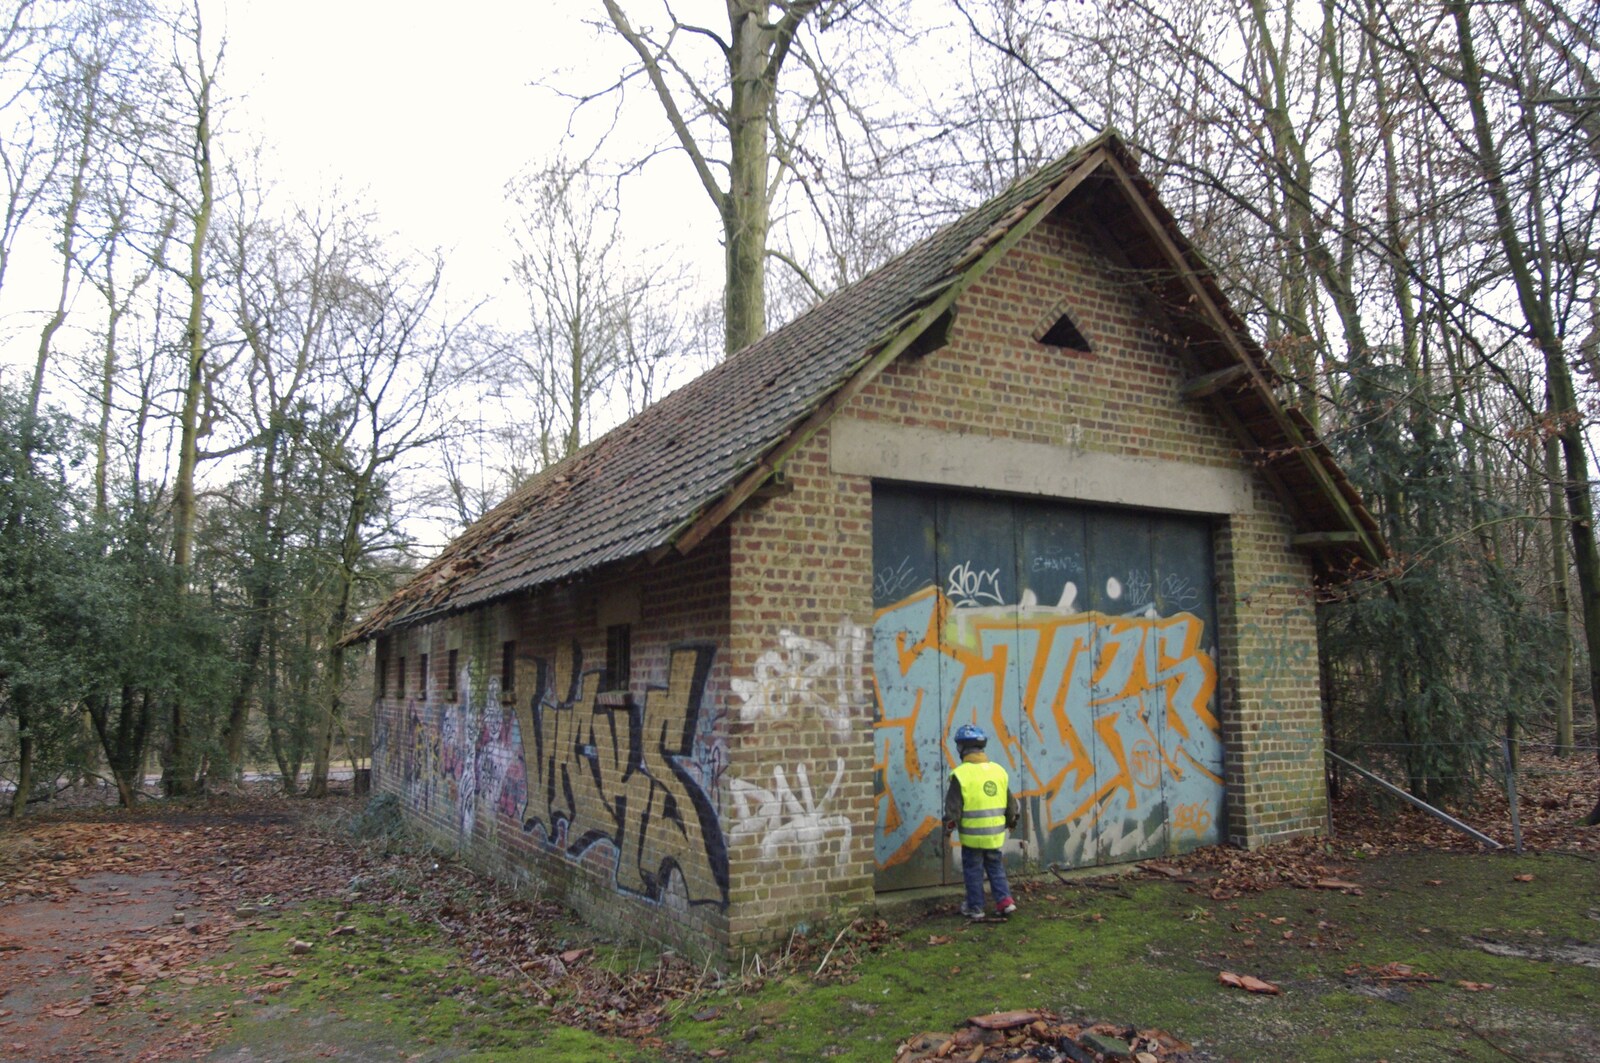 We find a derelict building in Royal Park from The Christmas Markets of Brussels, Belgium - 1st January 2007